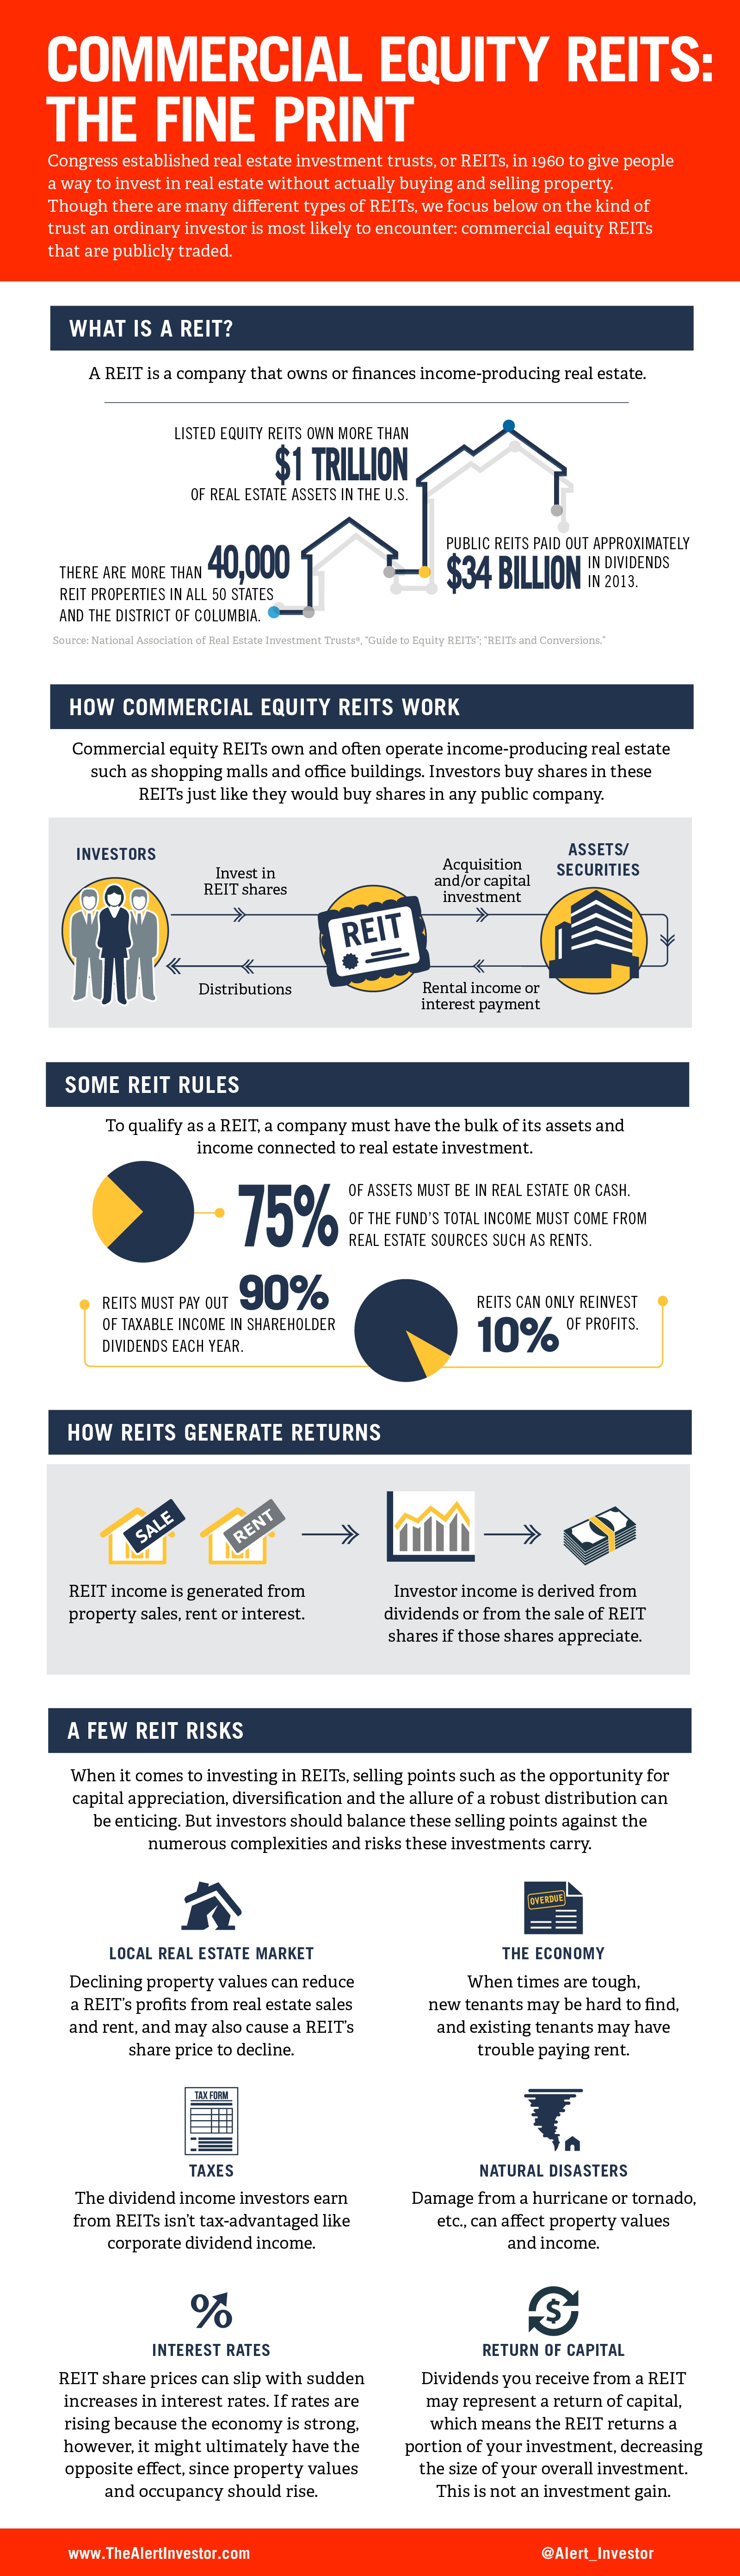 Infographic: Real Estate Investment Trusts (REITS)